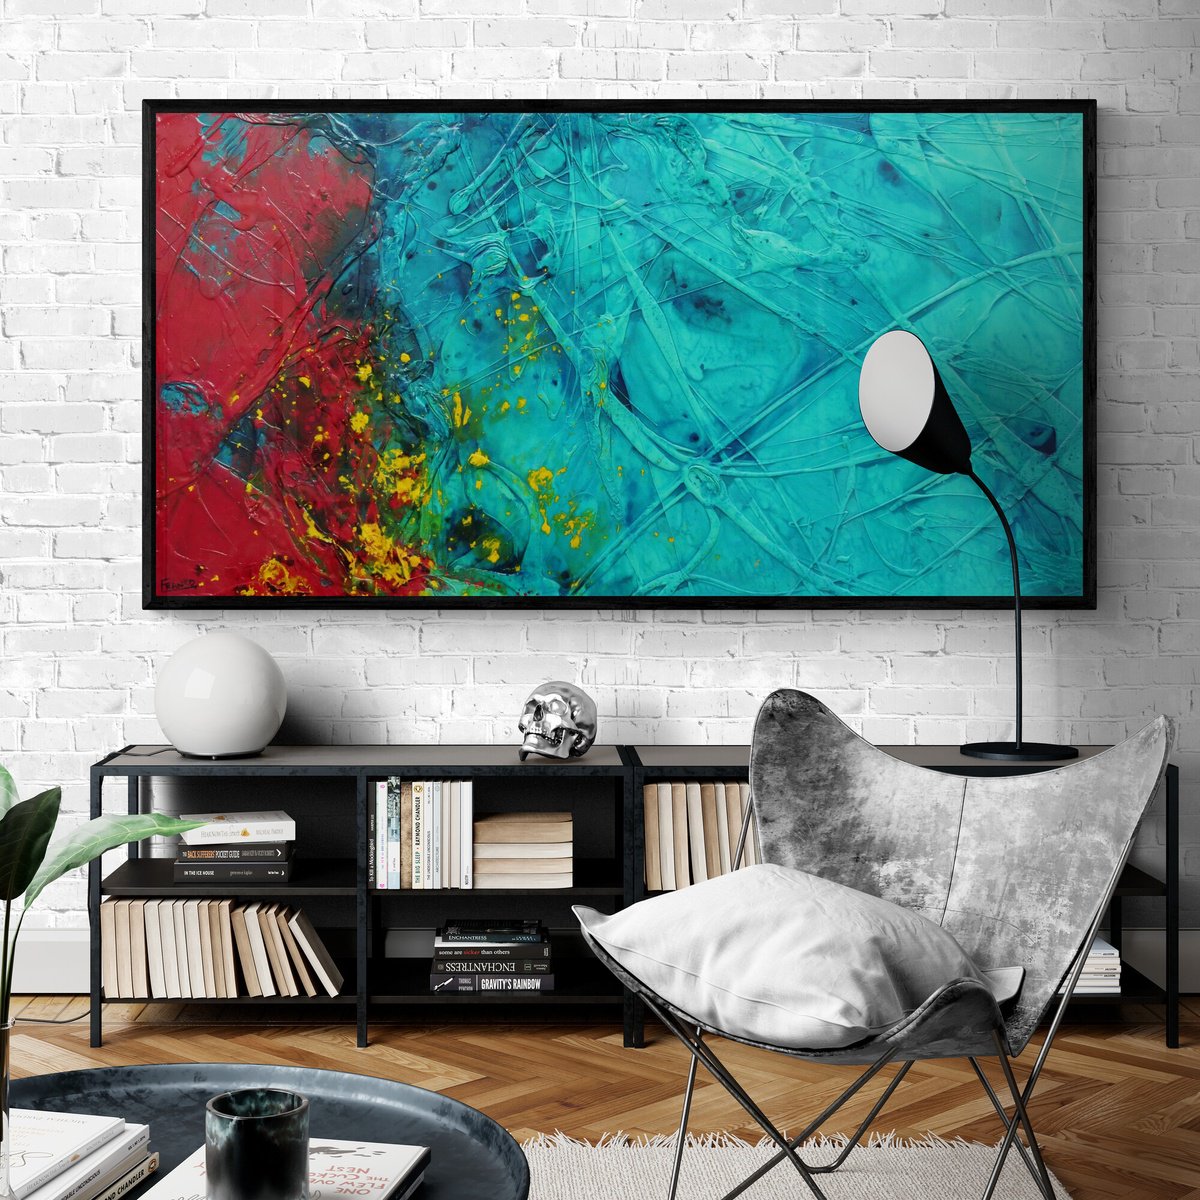 Jaded Red Dragon 190cm x 100cm Textured Abstract Art by Franko